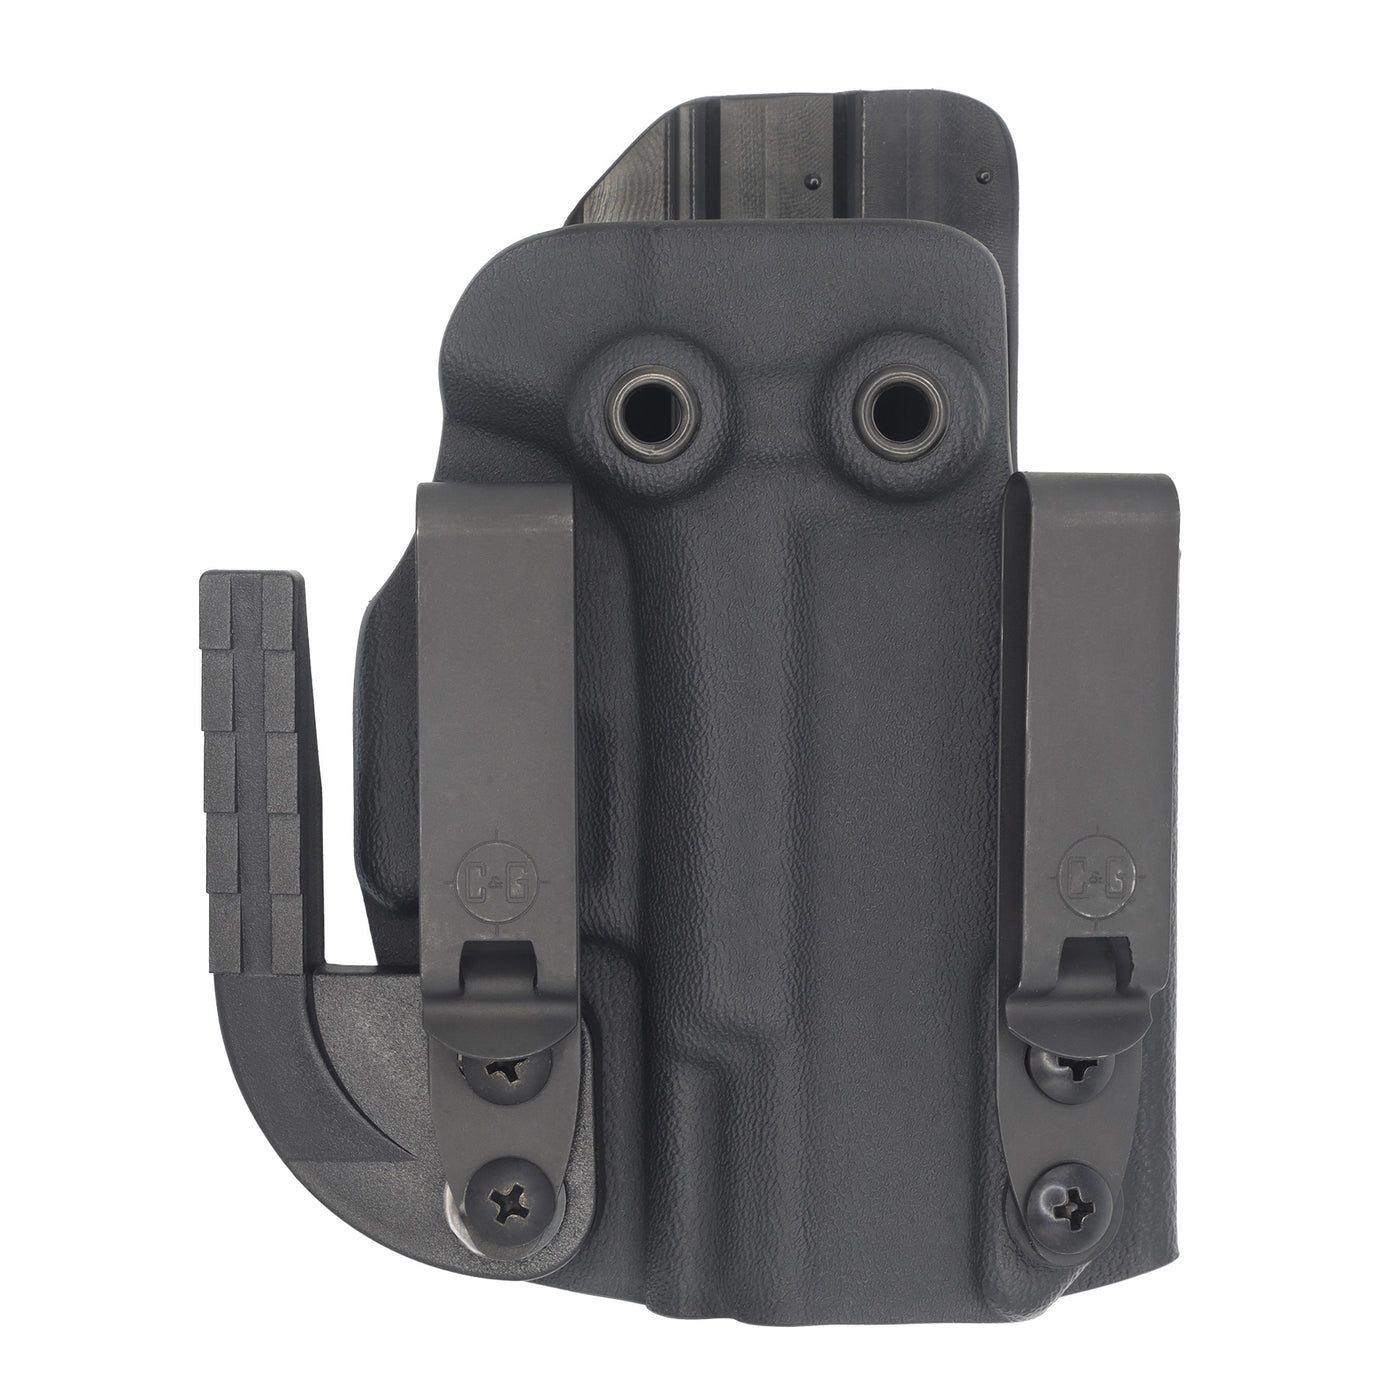 C&G Holsters IWB Alpha inside the waistband Holster for the Polymer 80 Poly80 PF9/40SC